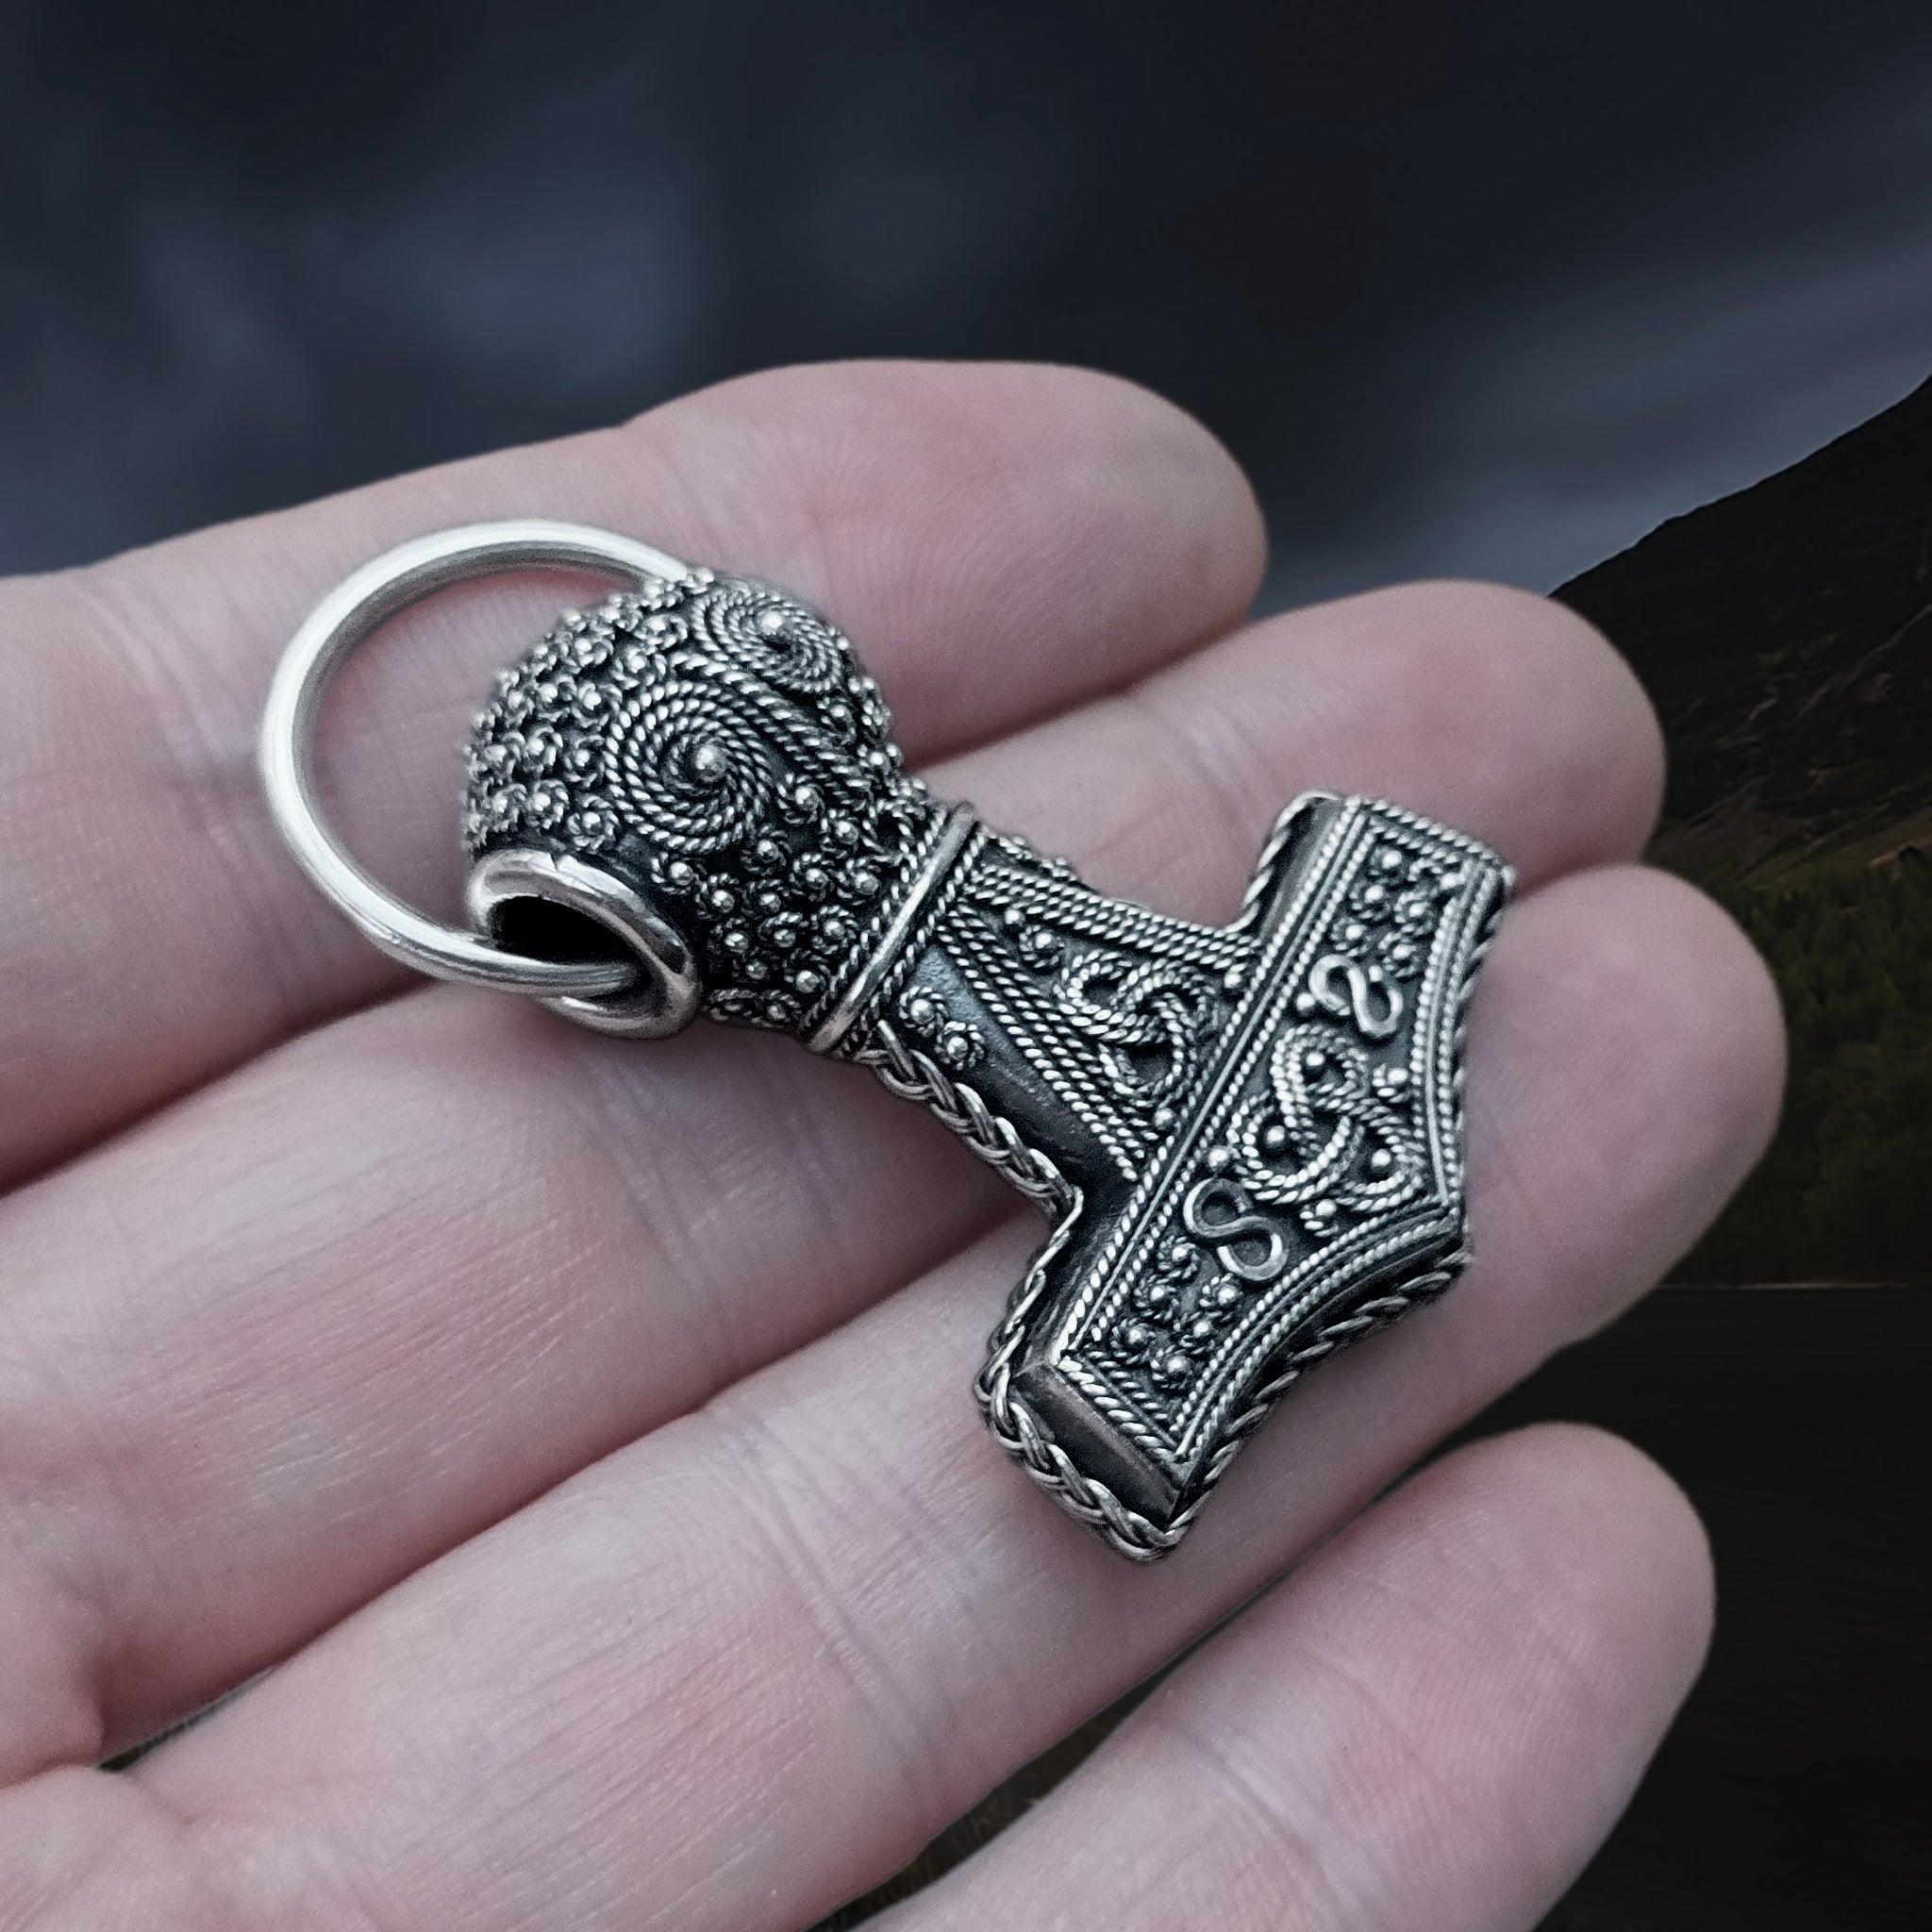 Silver Filigree Thors Hammer Pendant Replica from Öland with Split Ring on Hand - Angle View